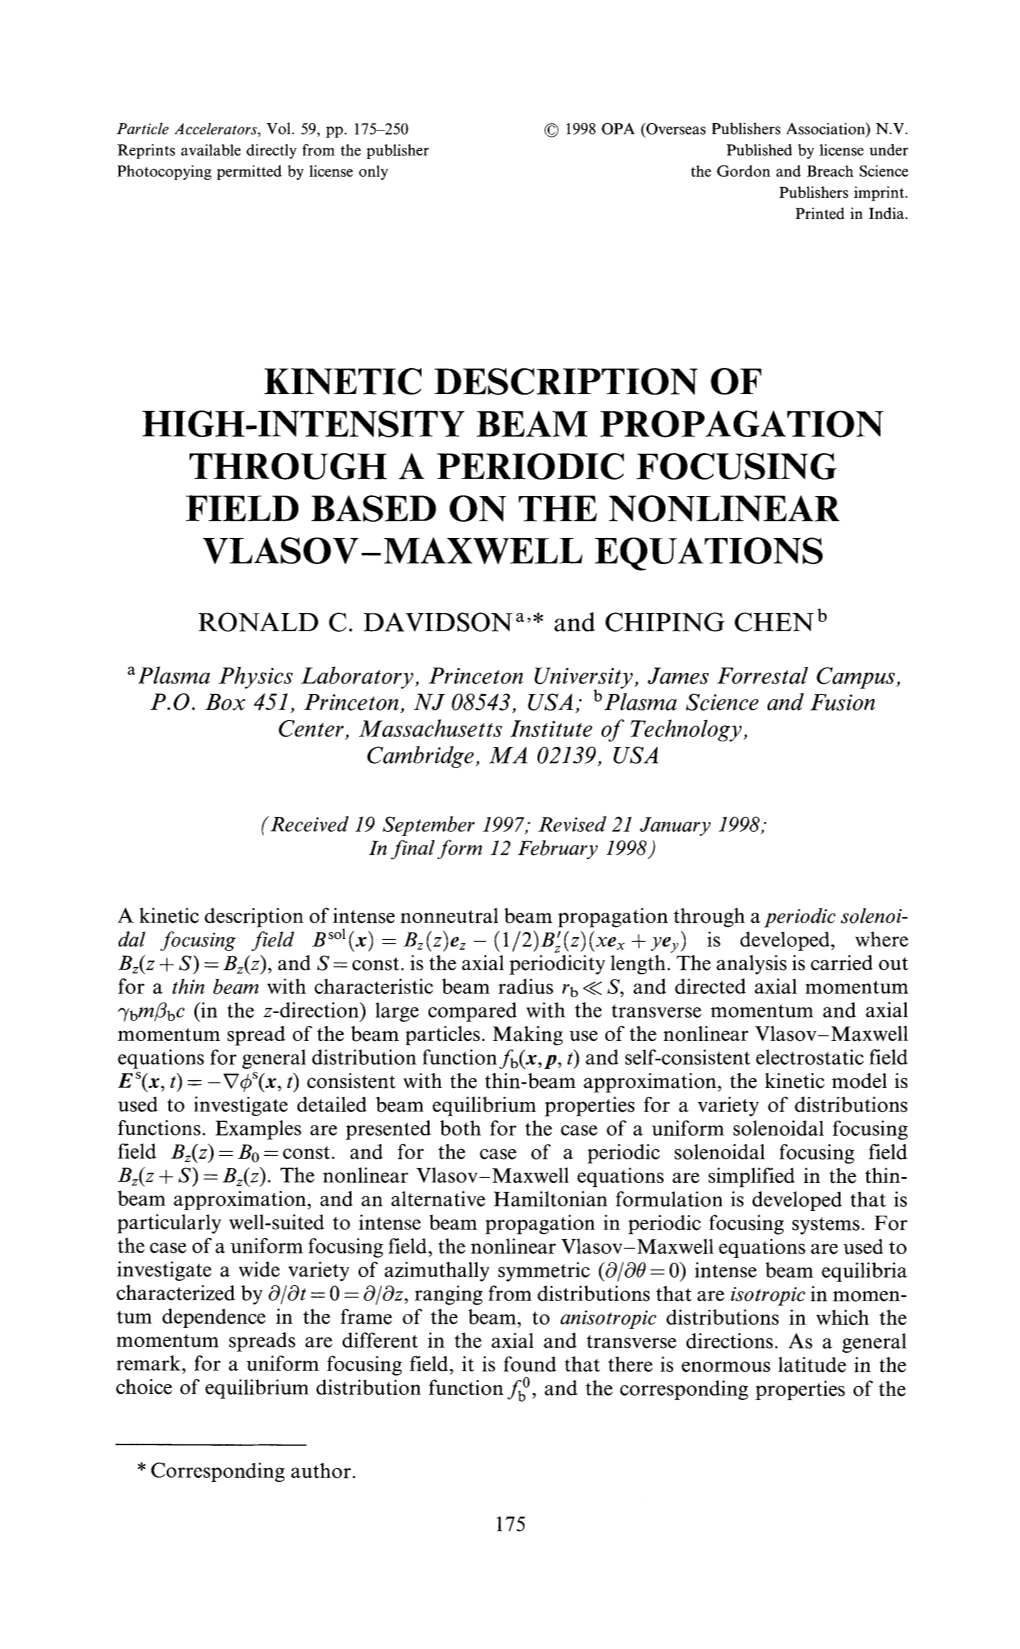 Kinetic Description of High-Intensity Beam Propagation Through a Periodic Focusing Field Based on the Nonlinear Vlasov-Maxwell Equations